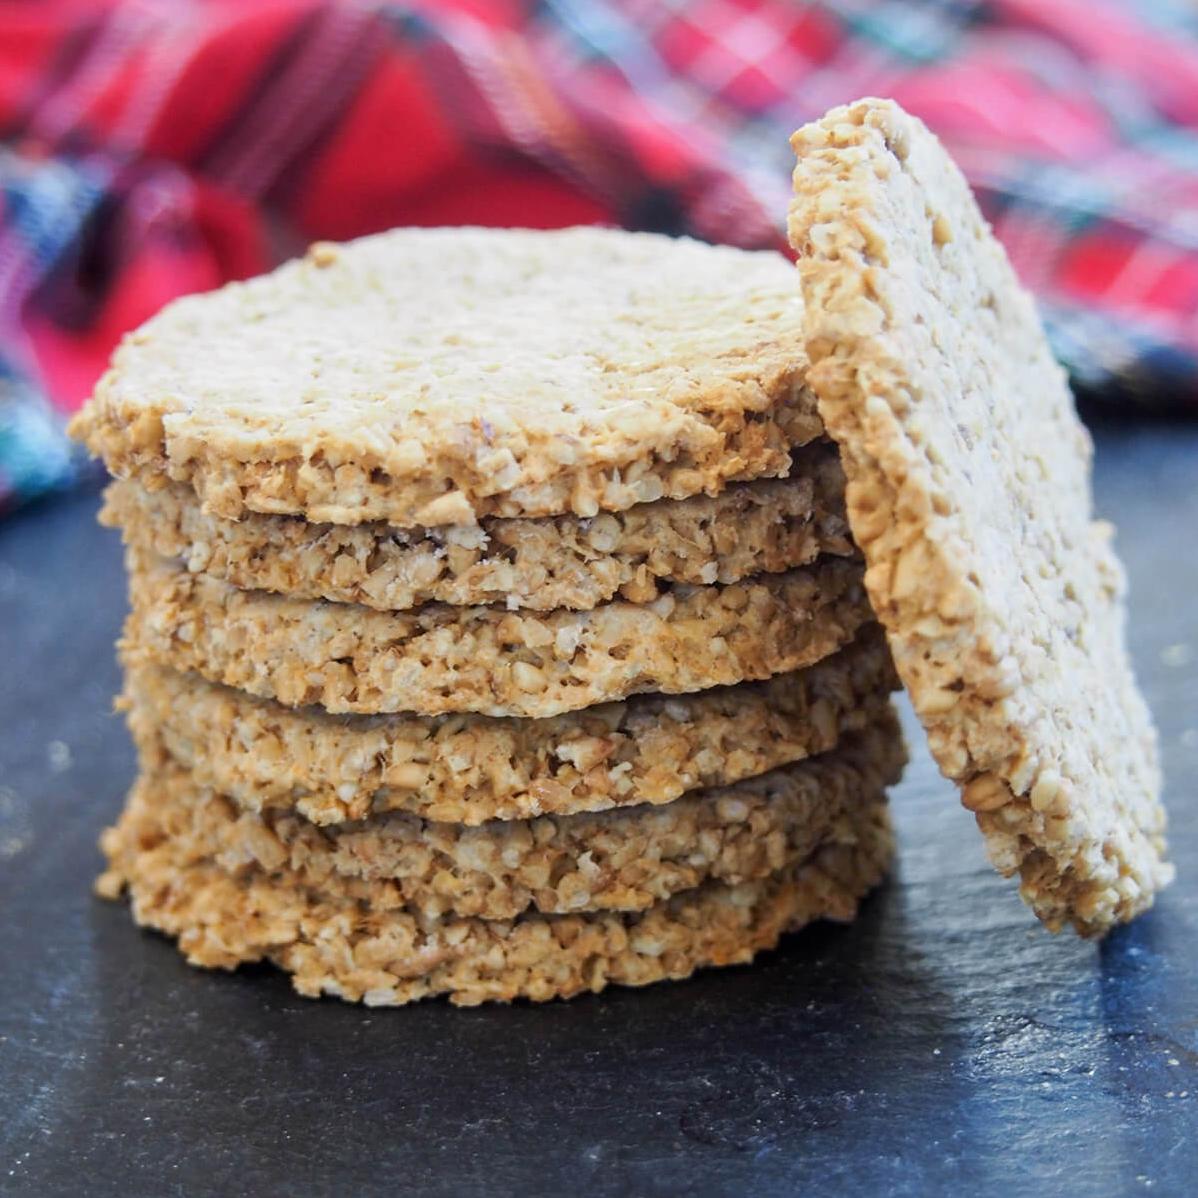  Get ready for some serious comfort food with these hearty oat biscuits.